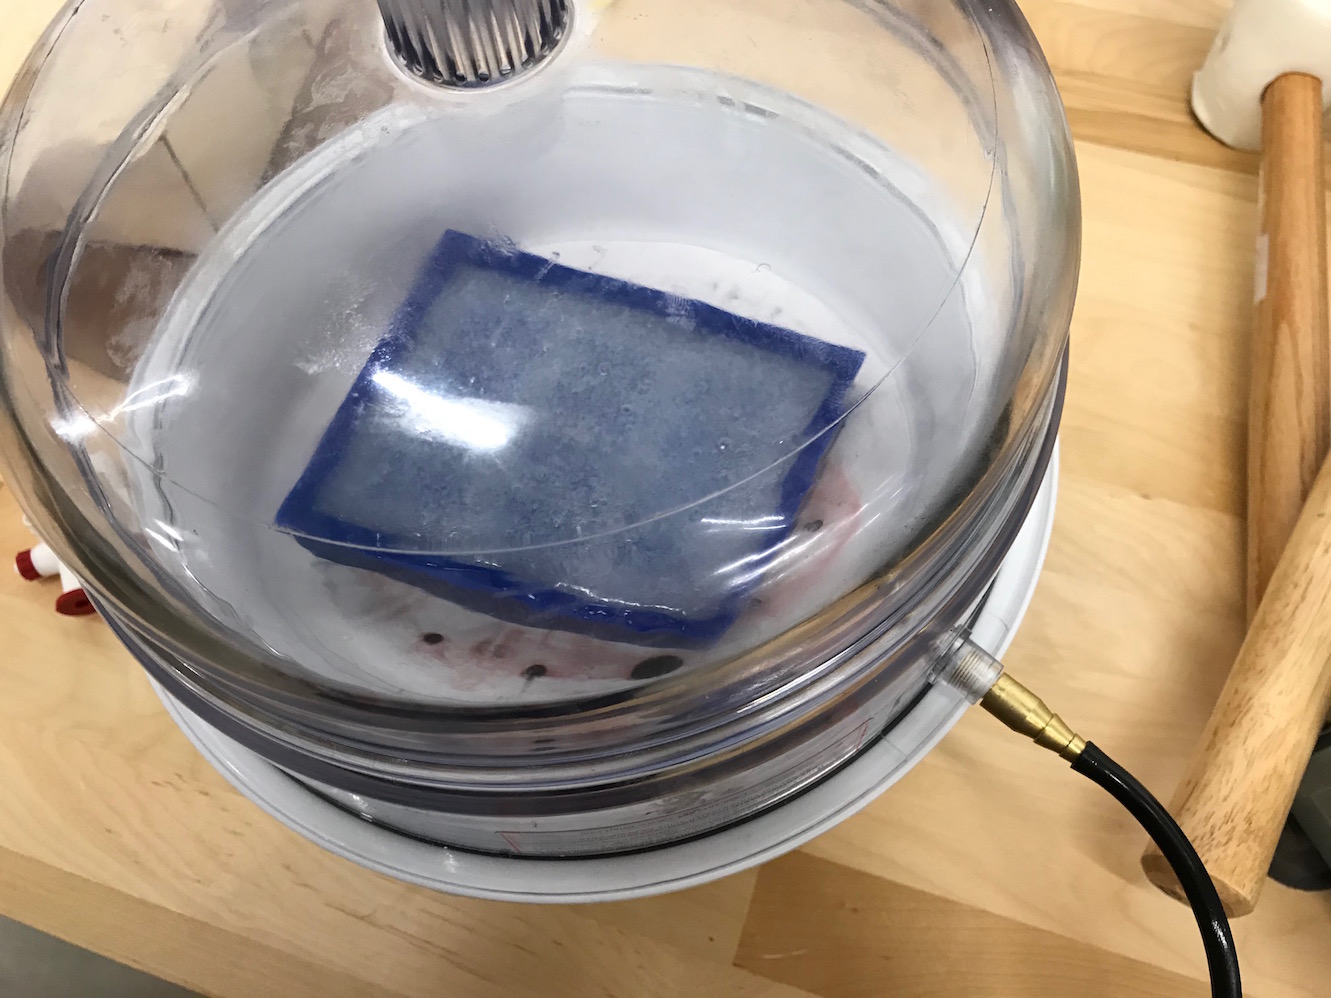 Silicone poured into countermold placed in vacuum chamber